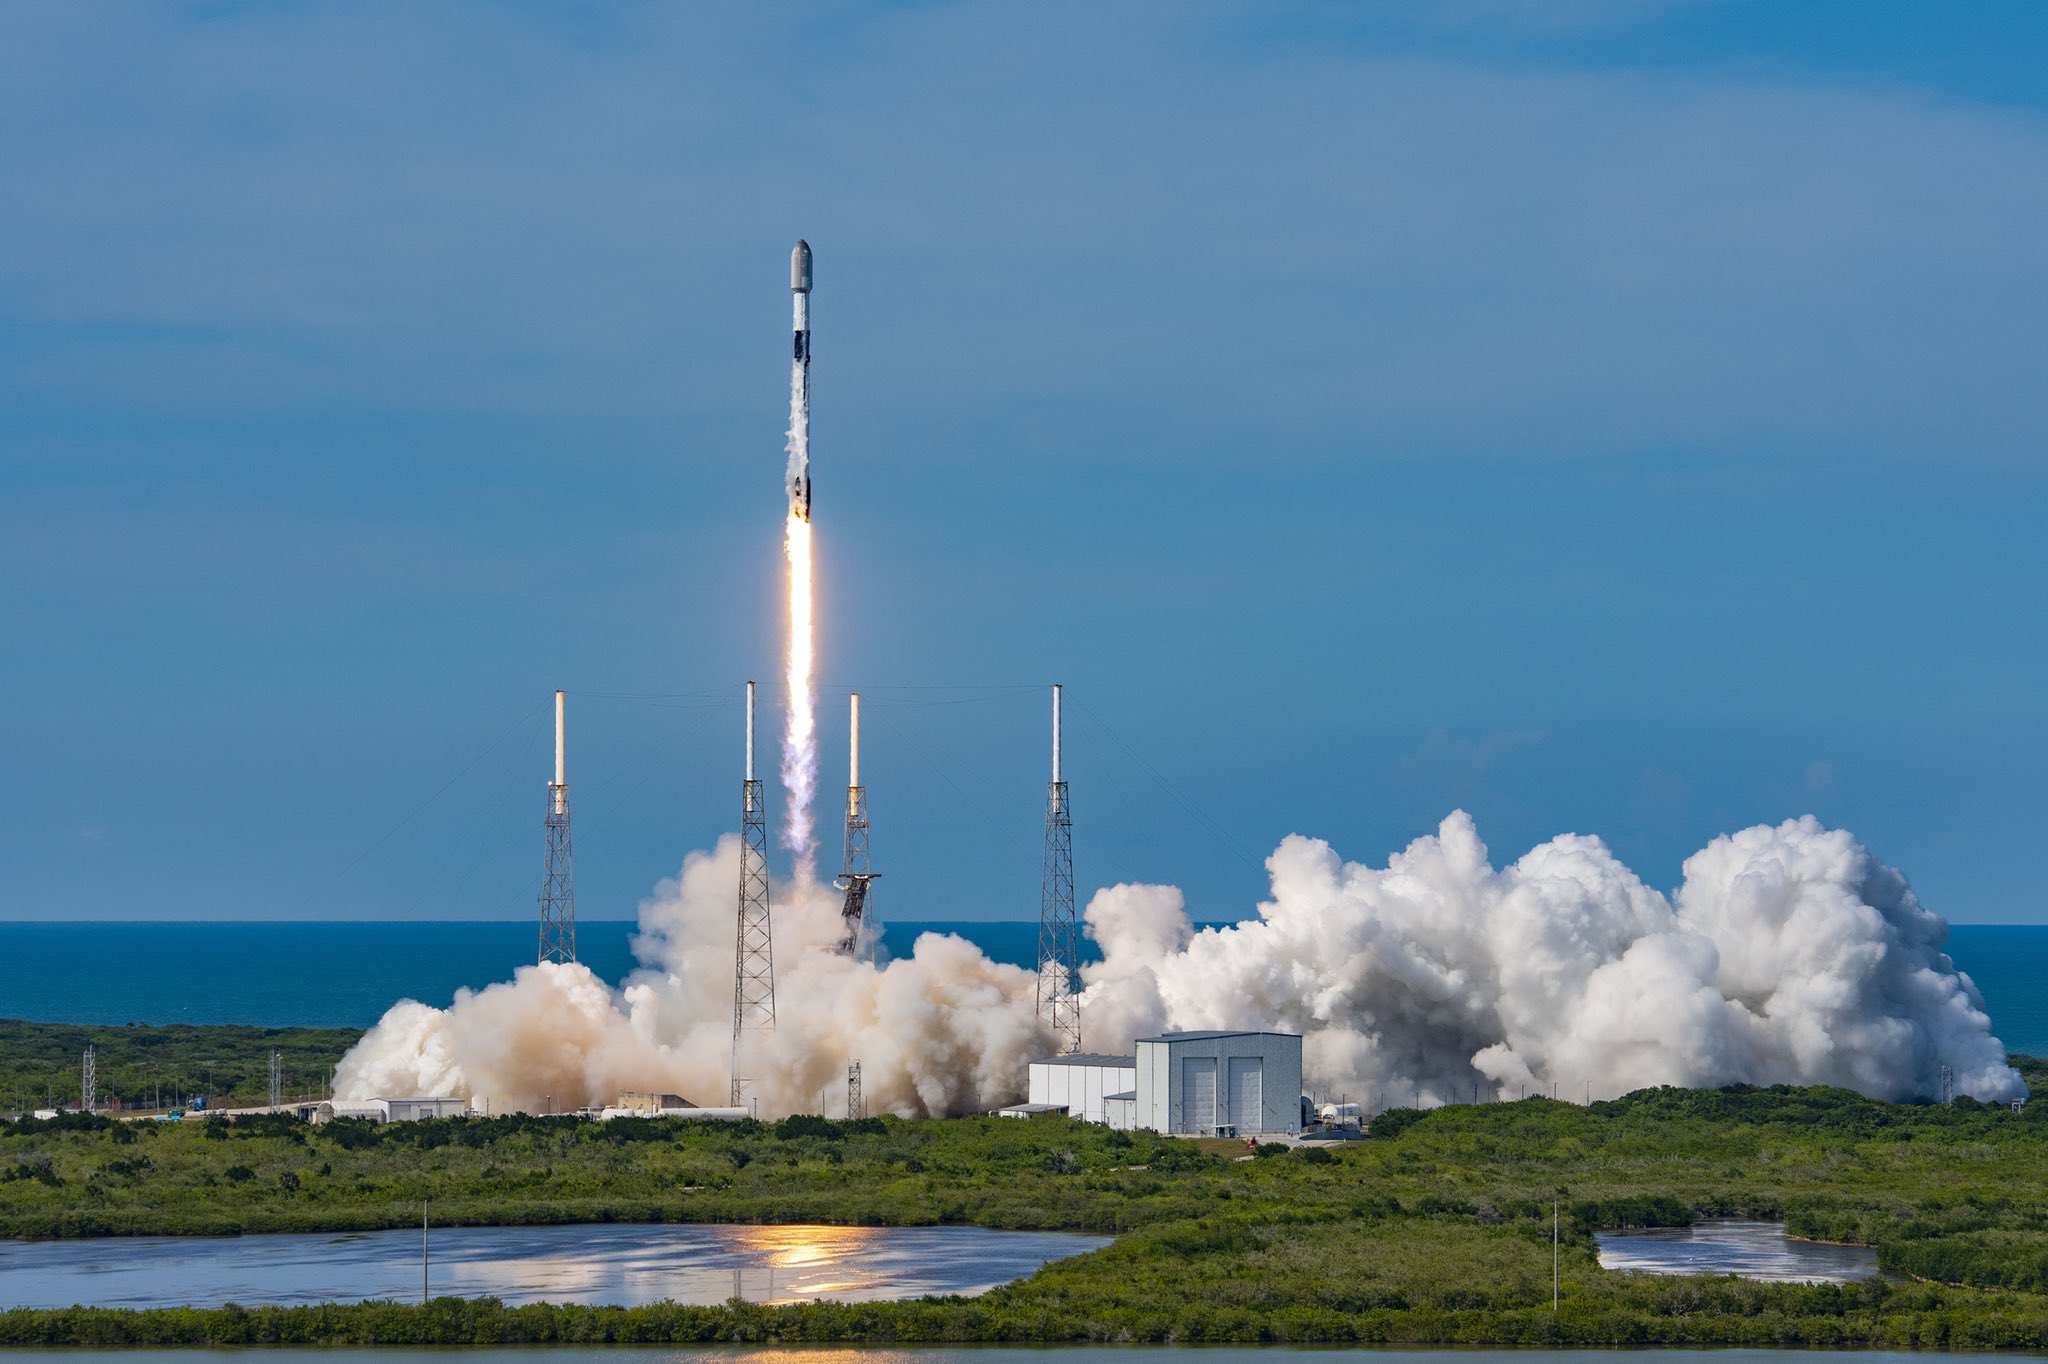 SpaceX launches another batch of Starlink internet satellites into orbit